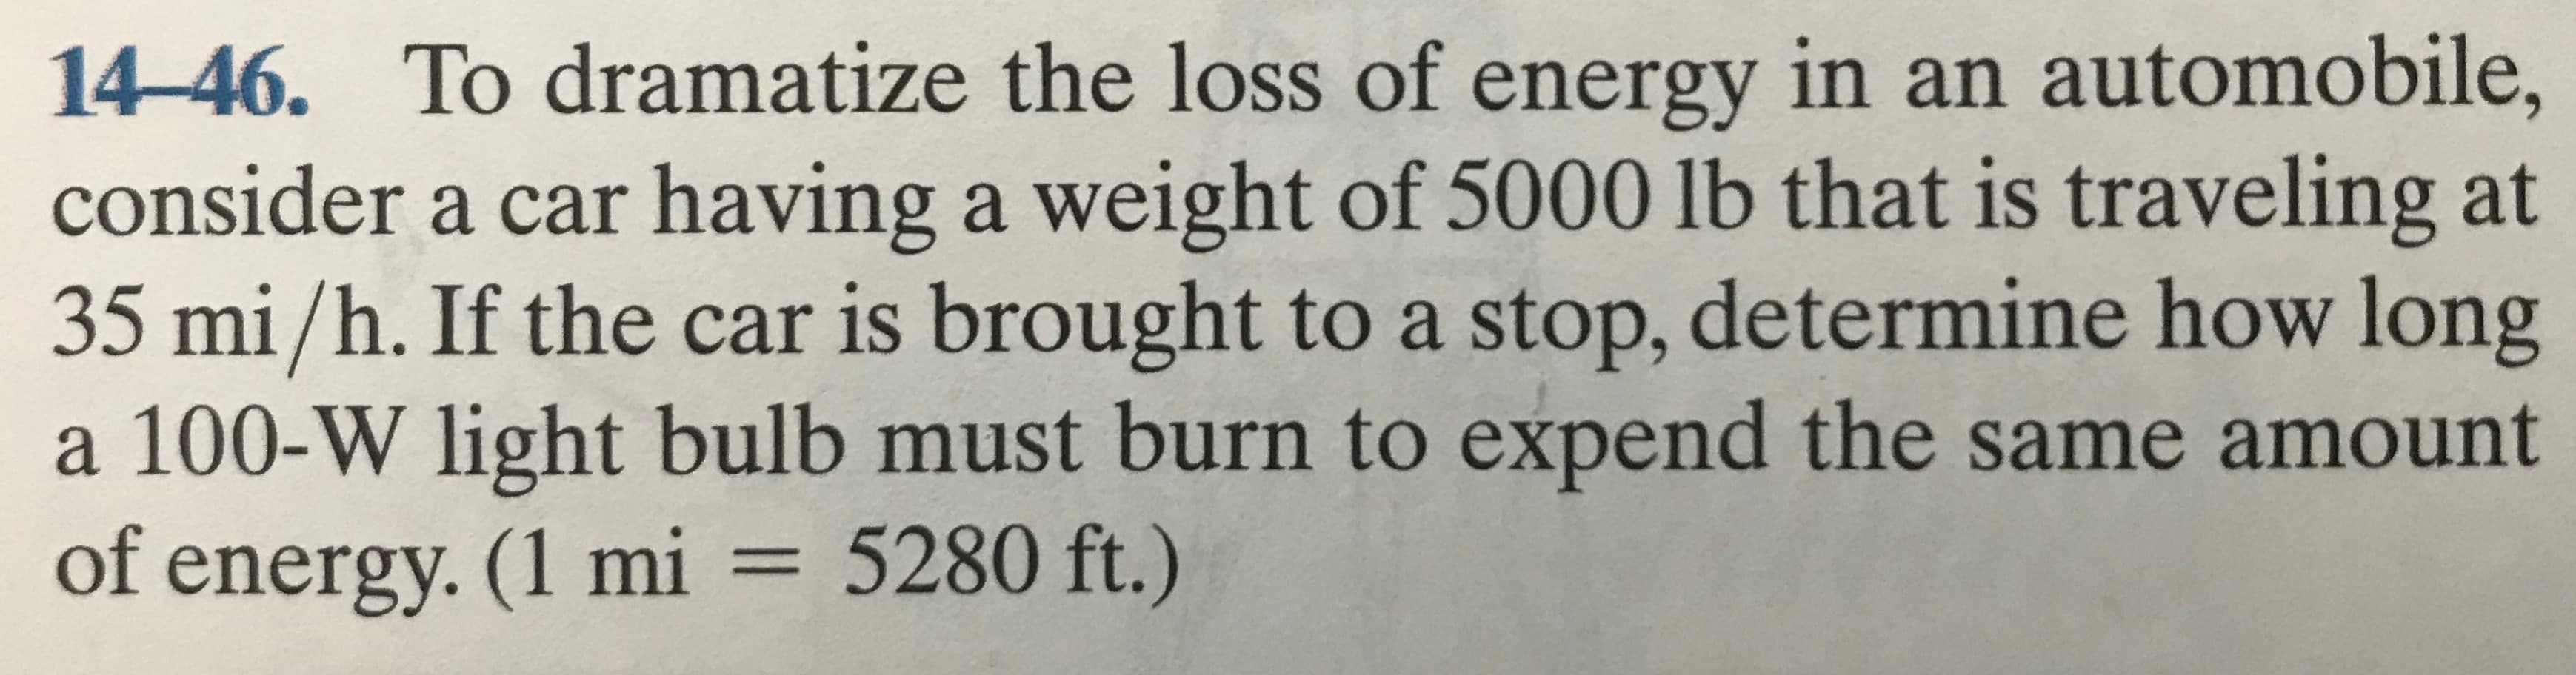 14-46. To dramatize the loss of energy in an automobile,
consider a car having a weight of 5000 lb that is traveling at
35 mi/h. If the car is brought to a stop, determine how long
a 100-W light bulb must burn to expend the same amount
of energy. (1 mi = 5280 ft.)
